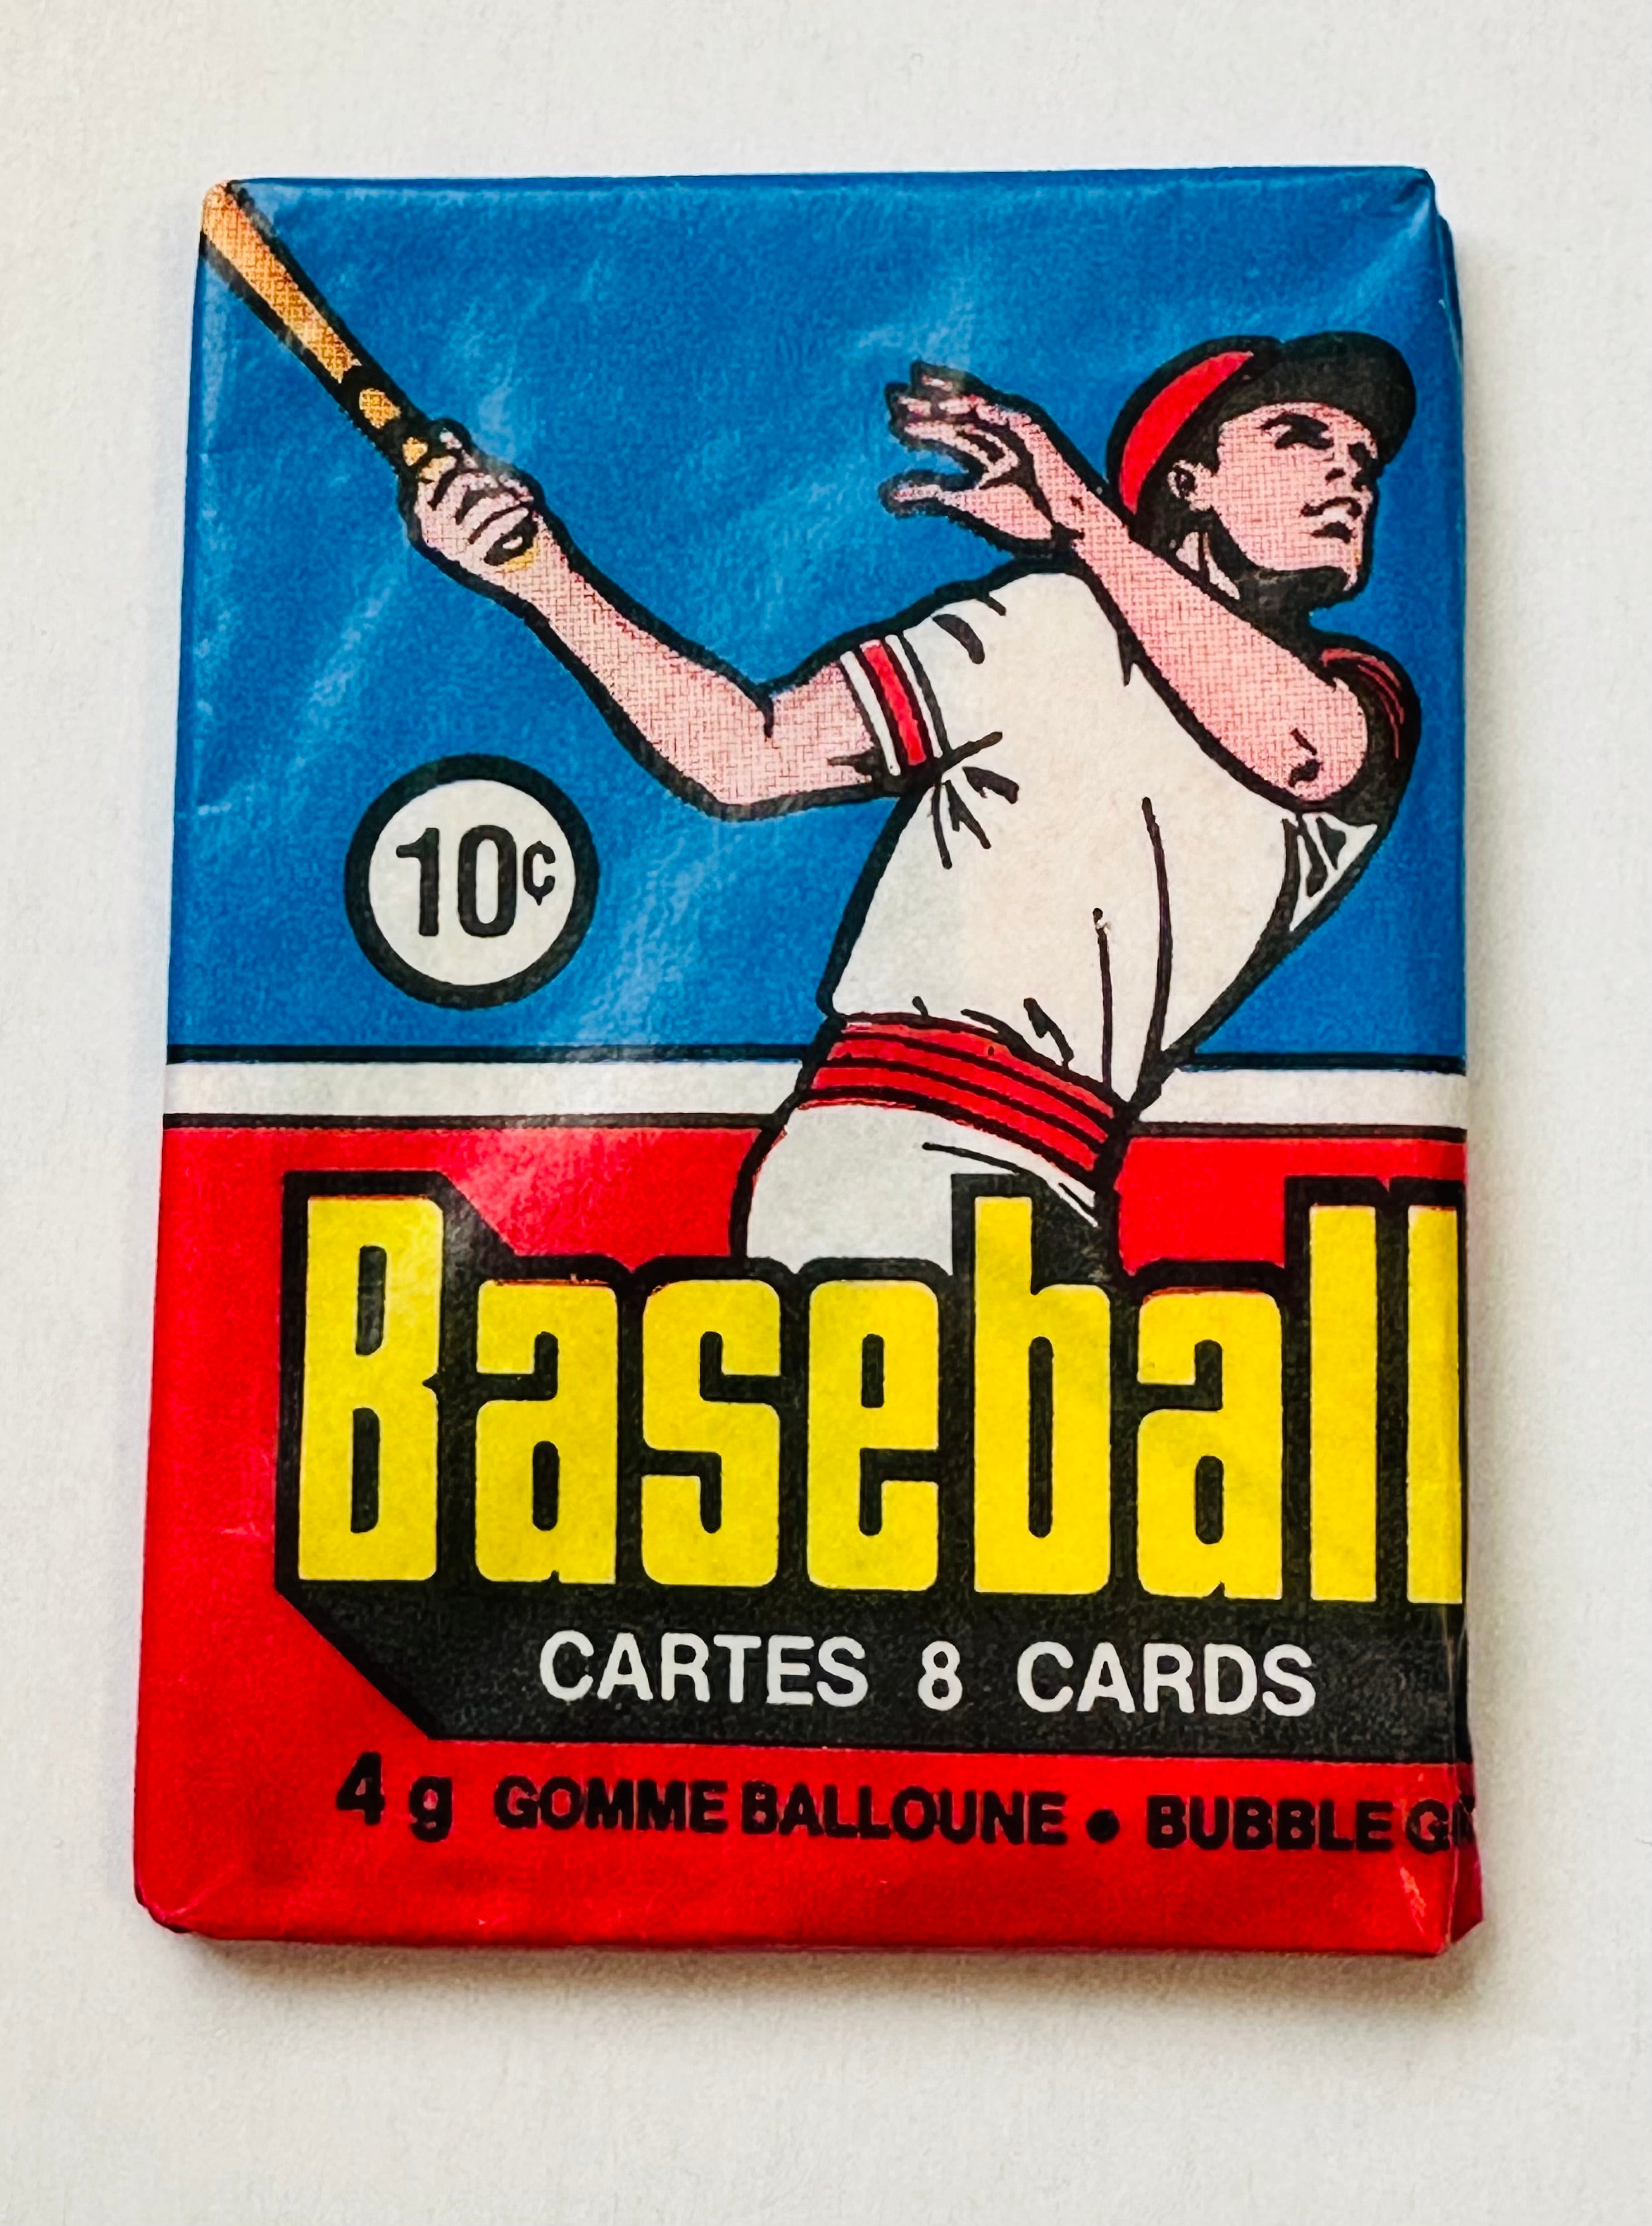 1977 Opc baseball cards rare Canadian sealed pack